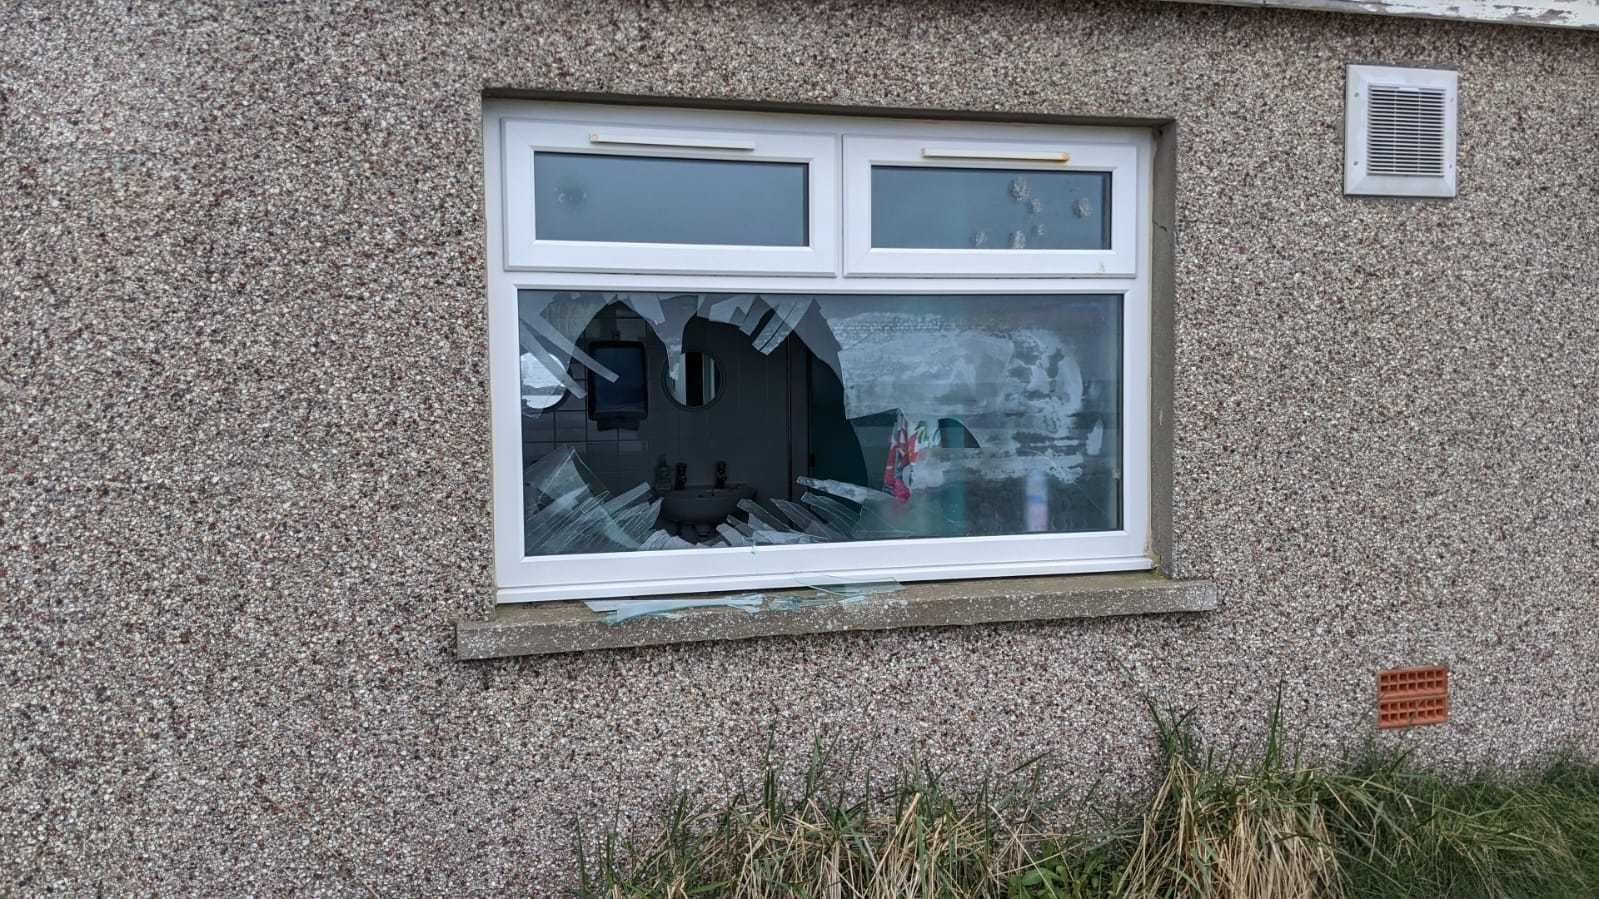 A beach-facing window was smashed at Moray Firth Watersports Association in Lossiemouth.